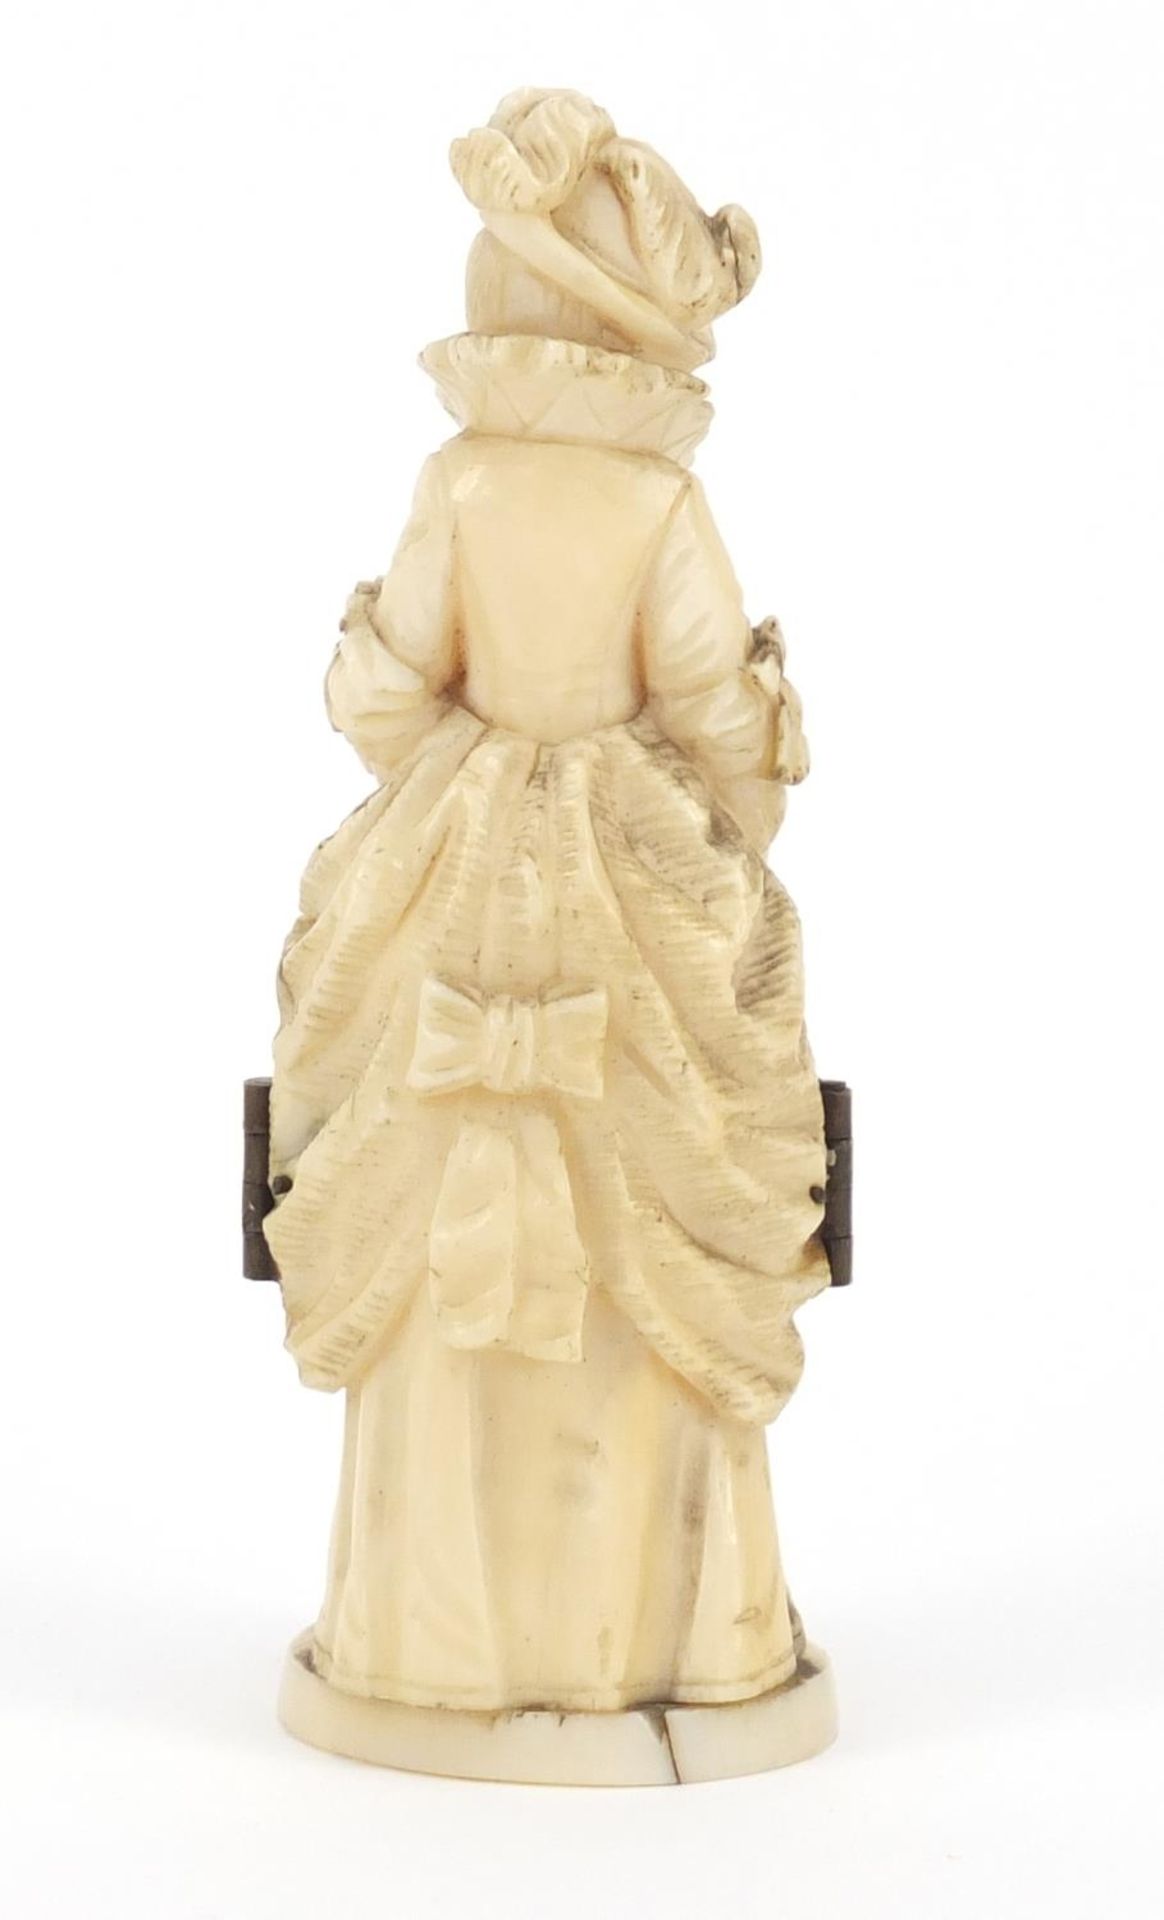 19th century French Dieppe carved ivory tryptych figure, 9cm high - Image 6 of 9